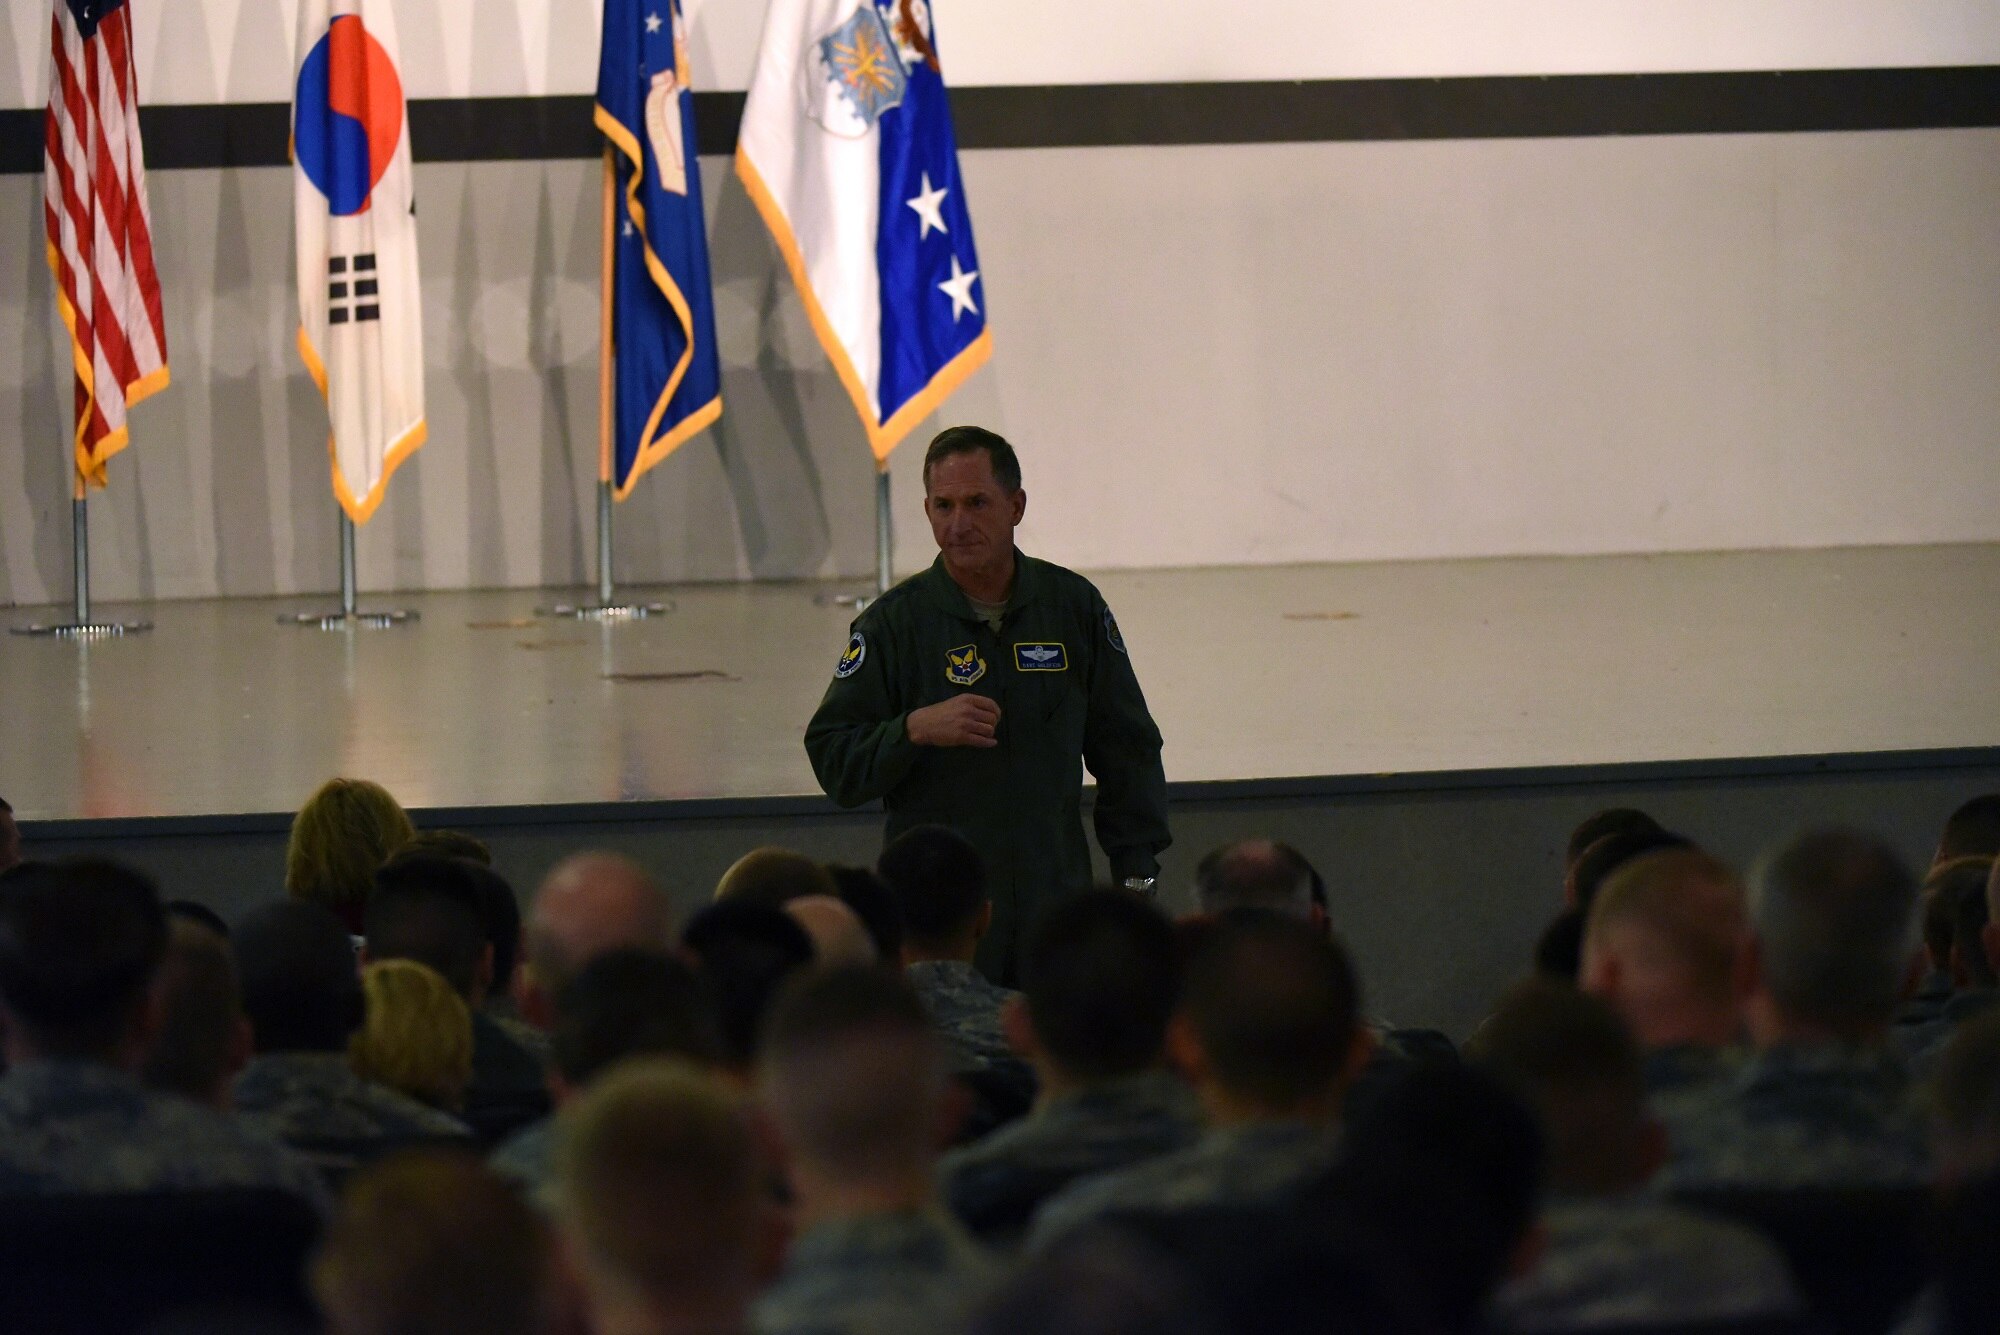 Air Force Chief of Staff, Gen. David L. Goldfein, speaks to airmen in the base theater during an all call at Kunsan Air Base, Republic of Korea, Nov. 2, 2016. Goldfein traveled to Kunsan to meet with airmen and discuss his focus areas as Air Force Chief of Staff as well as the Air Force mission throughout the Pacific region.  (U.S. Air Force photo by Tech. Sgt. Jeff Andrejcik/Released)